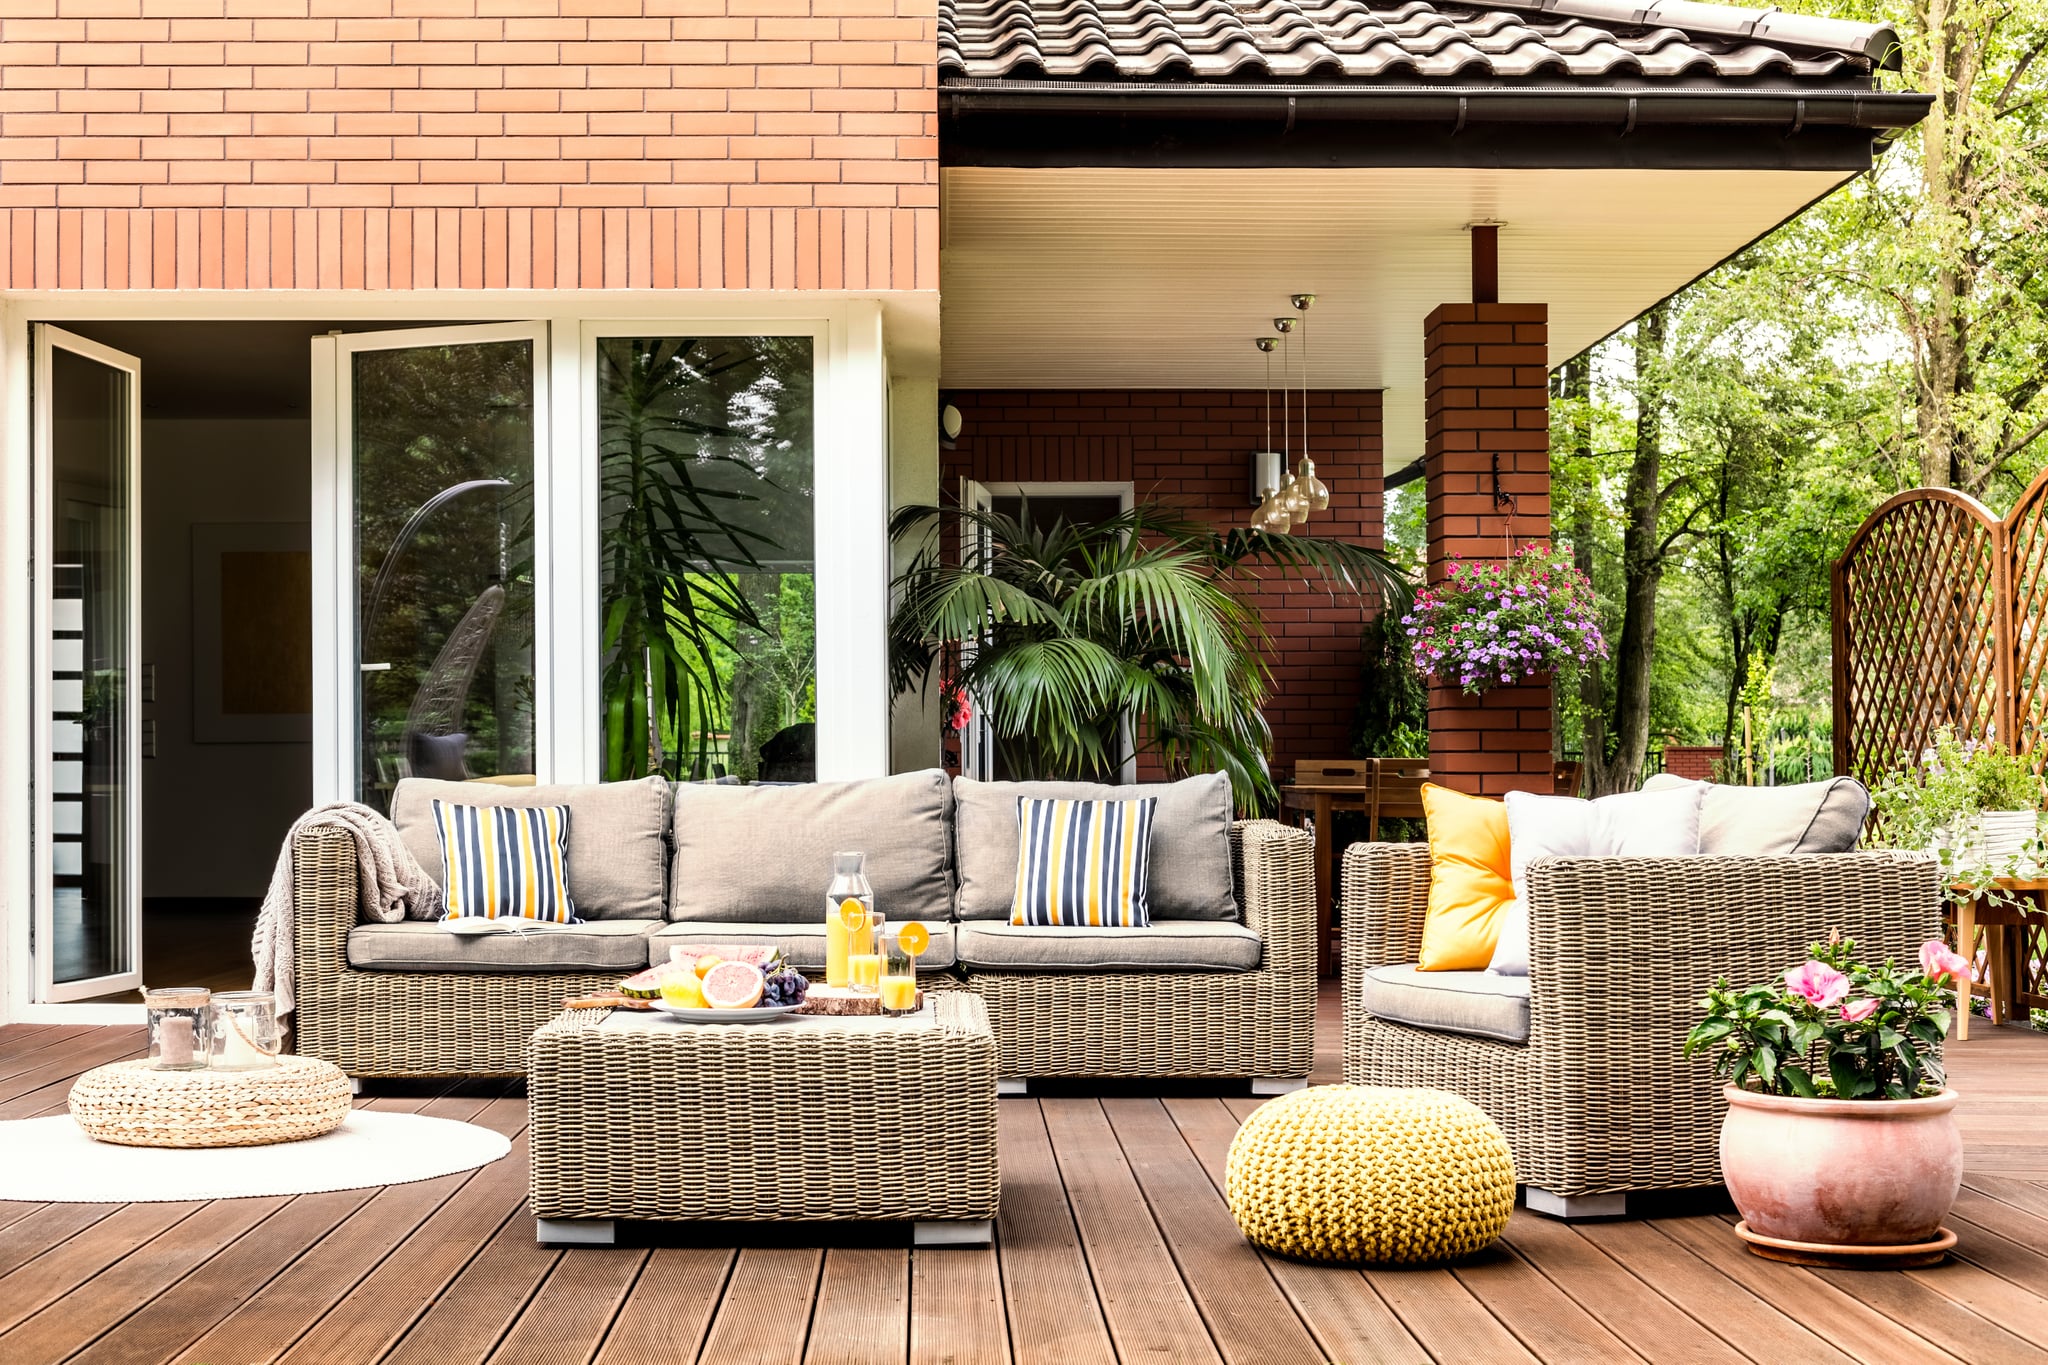 Ways you can prepare your home for summer